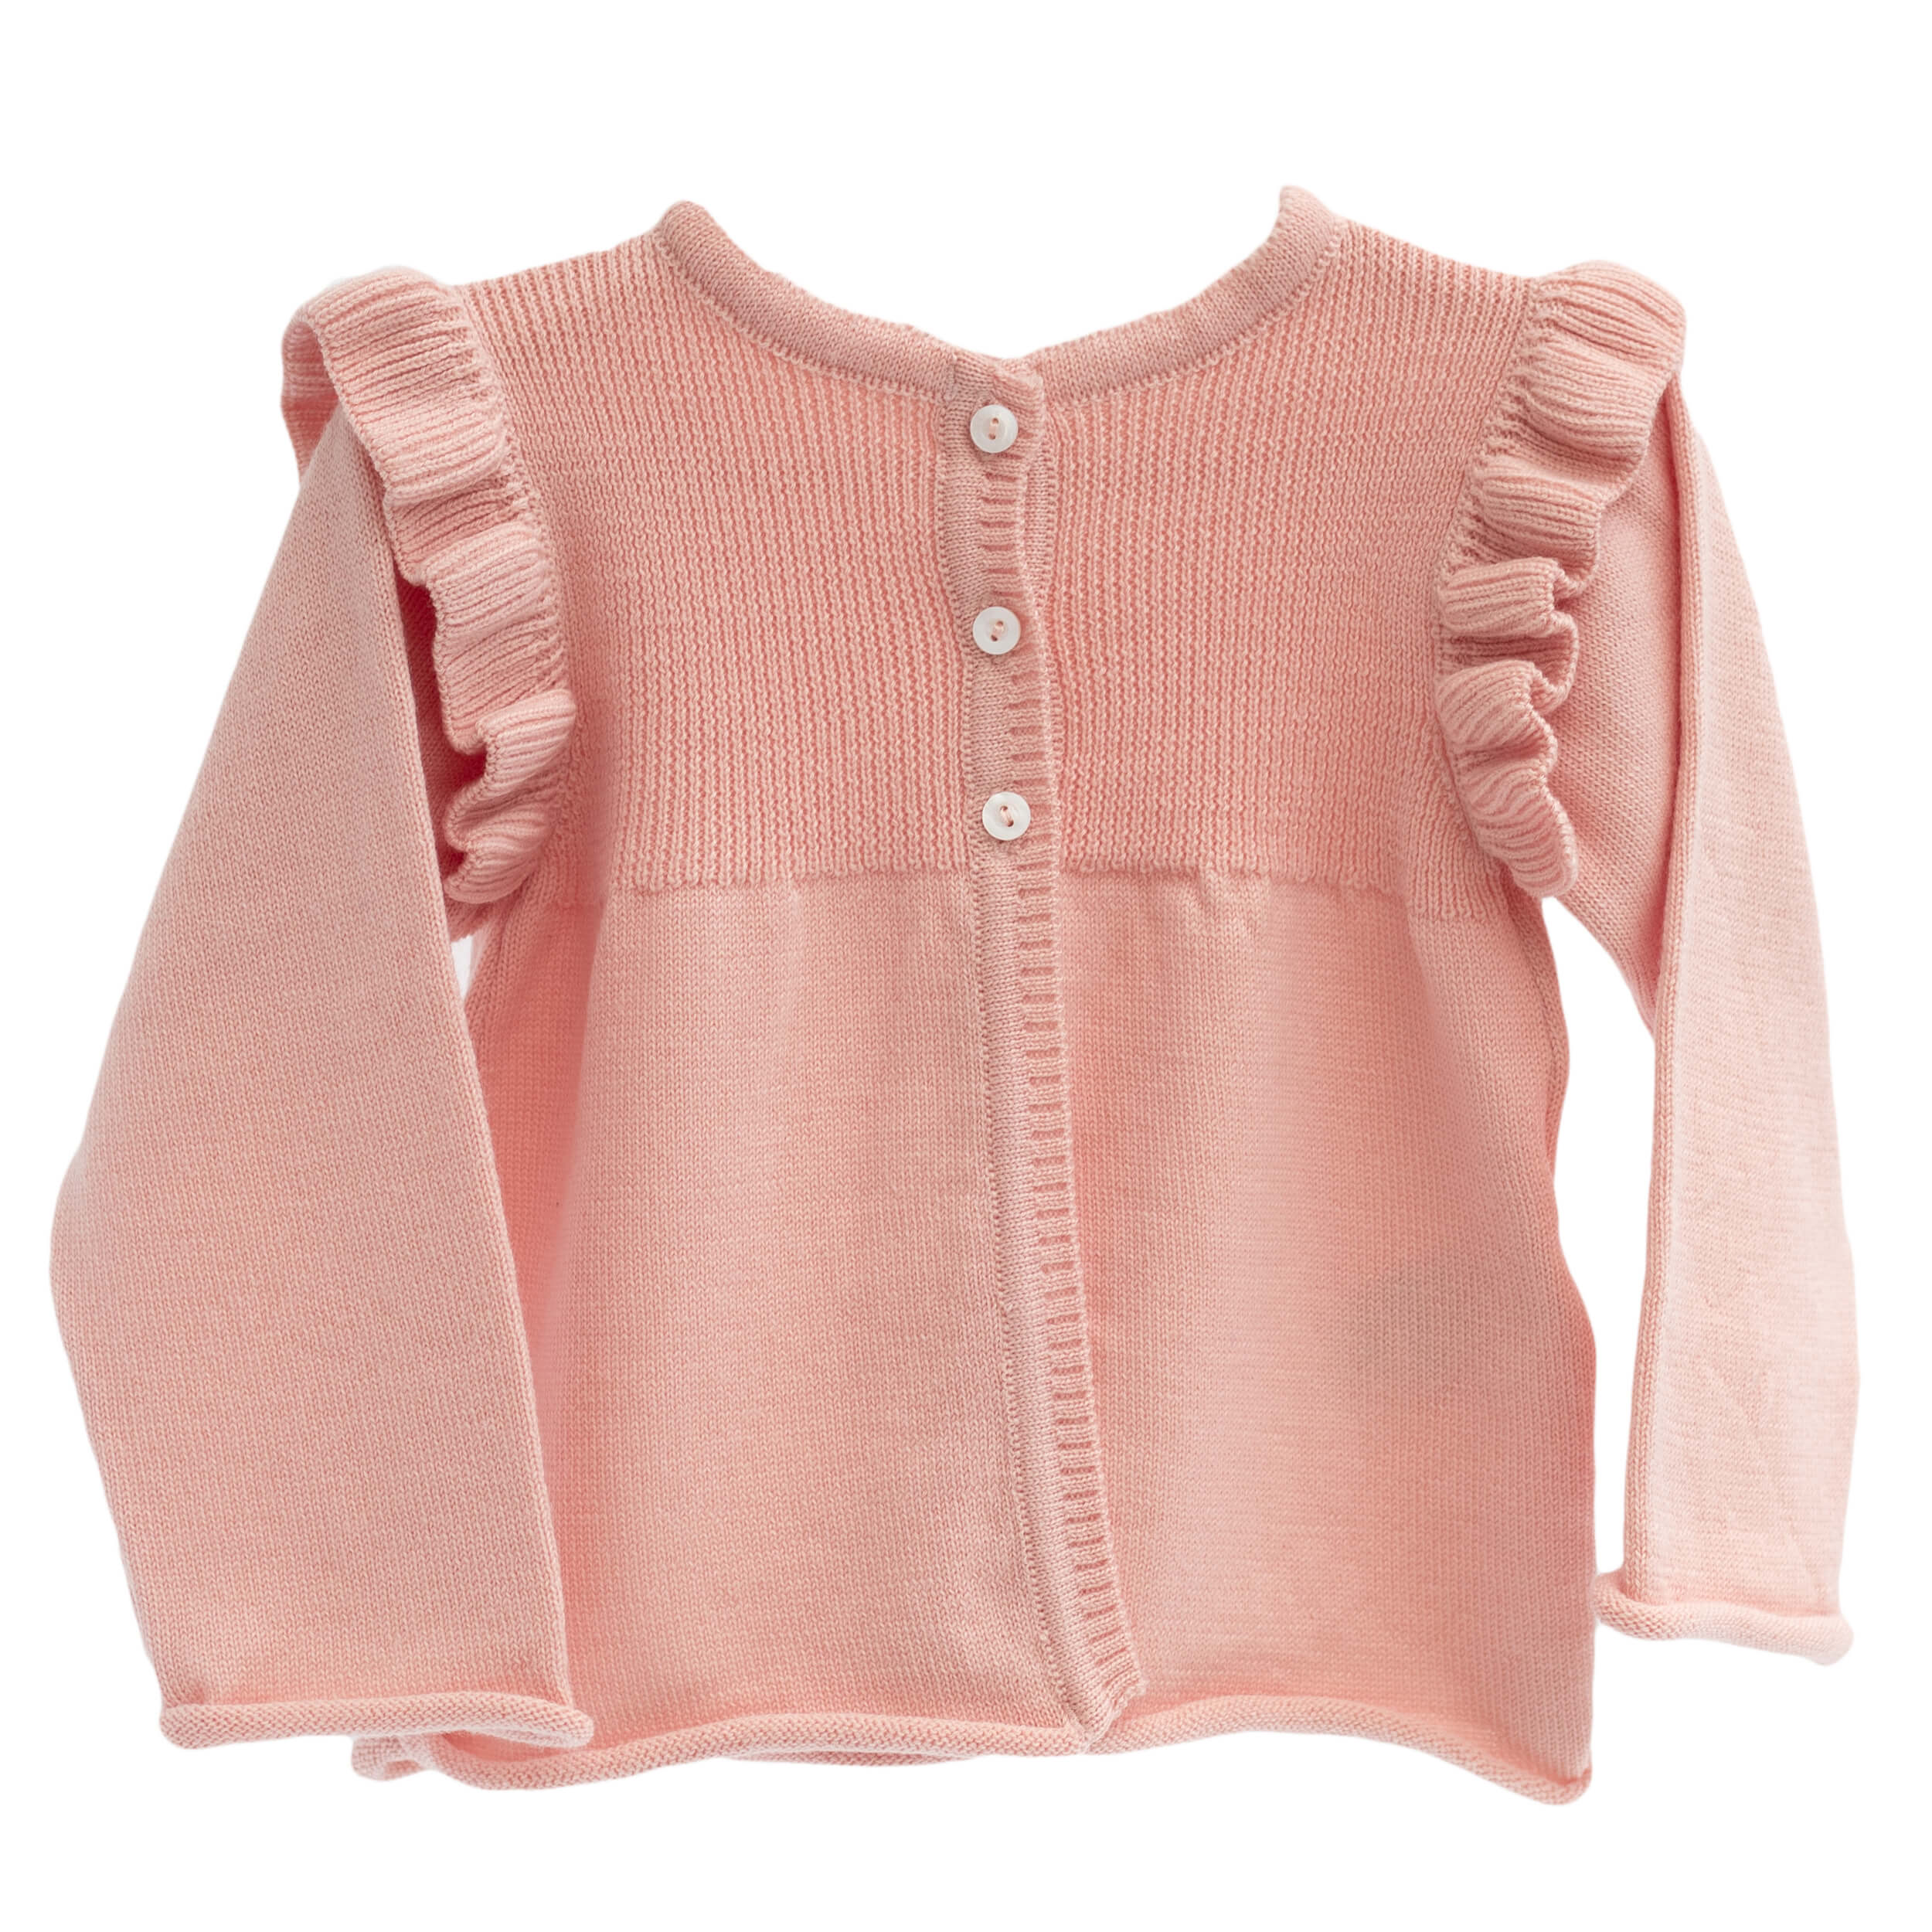 wedoble wool baby cardigan in pink, made in portugal